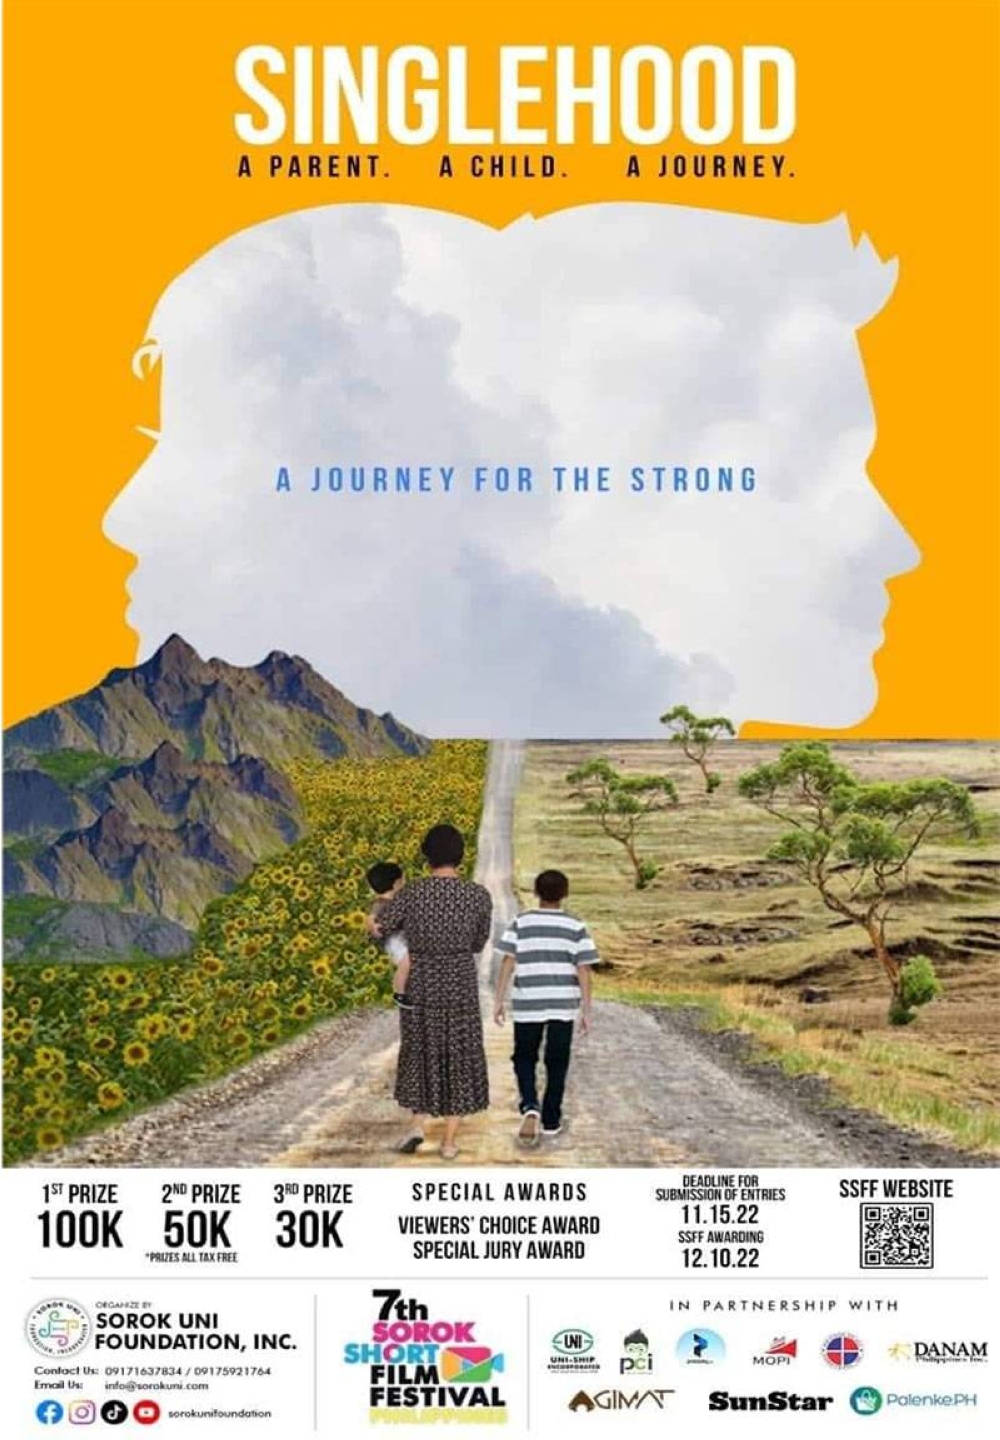 7th Sorok Short Film Festival launched, centers on single parents | The  Manila Times